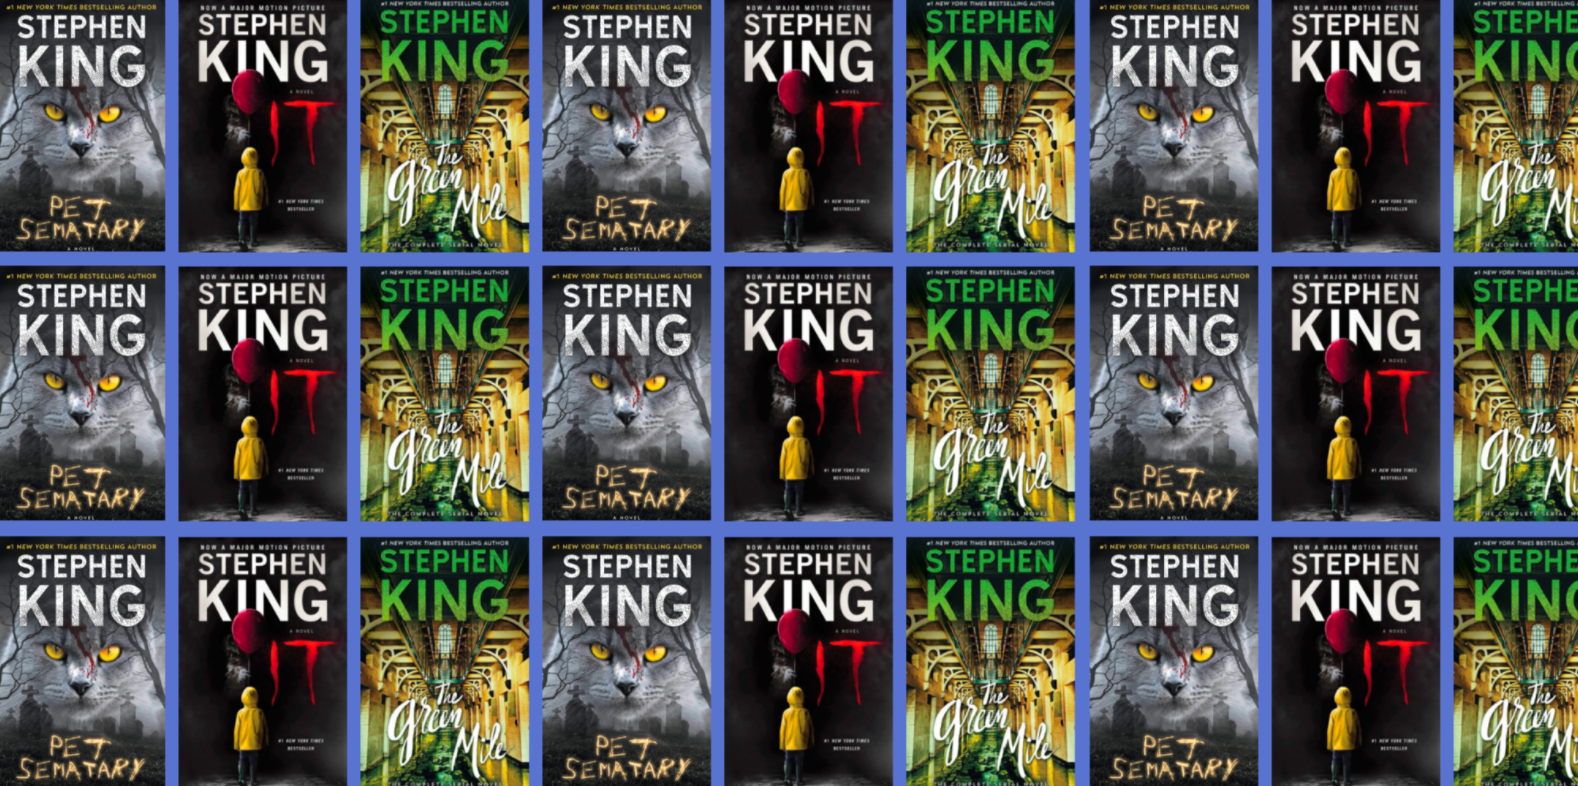 The Stephen King - Must-Read Stephen King Books